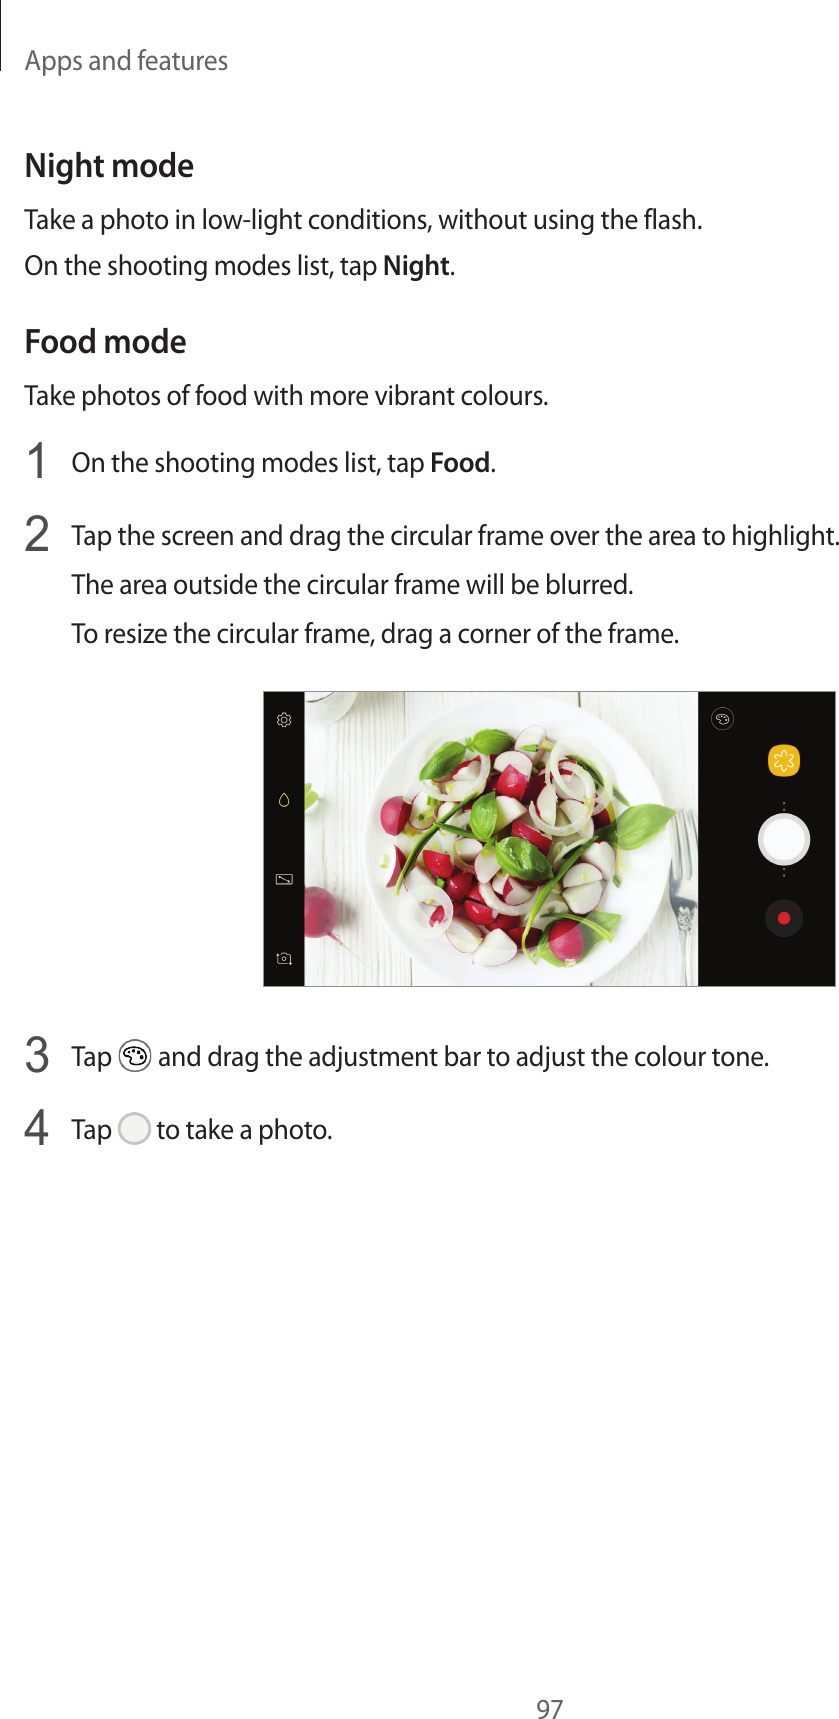 Apps and features97Night modeTake a photo in low-light conditions, without using the flash.On the shooting modes list, tap Night.Food modeTake photos of food with more vibrant colours.1  On the shooting modes list, tap Food.2  Tap the screen and drag the circular frame over the area to highlight.The area outside the circular frame will be blurred.To resize the circular frame, drag a corner of the frame.3  Tap   and drag the adjustment bar to adjust the colour tone.4  Tap   to take a photo.